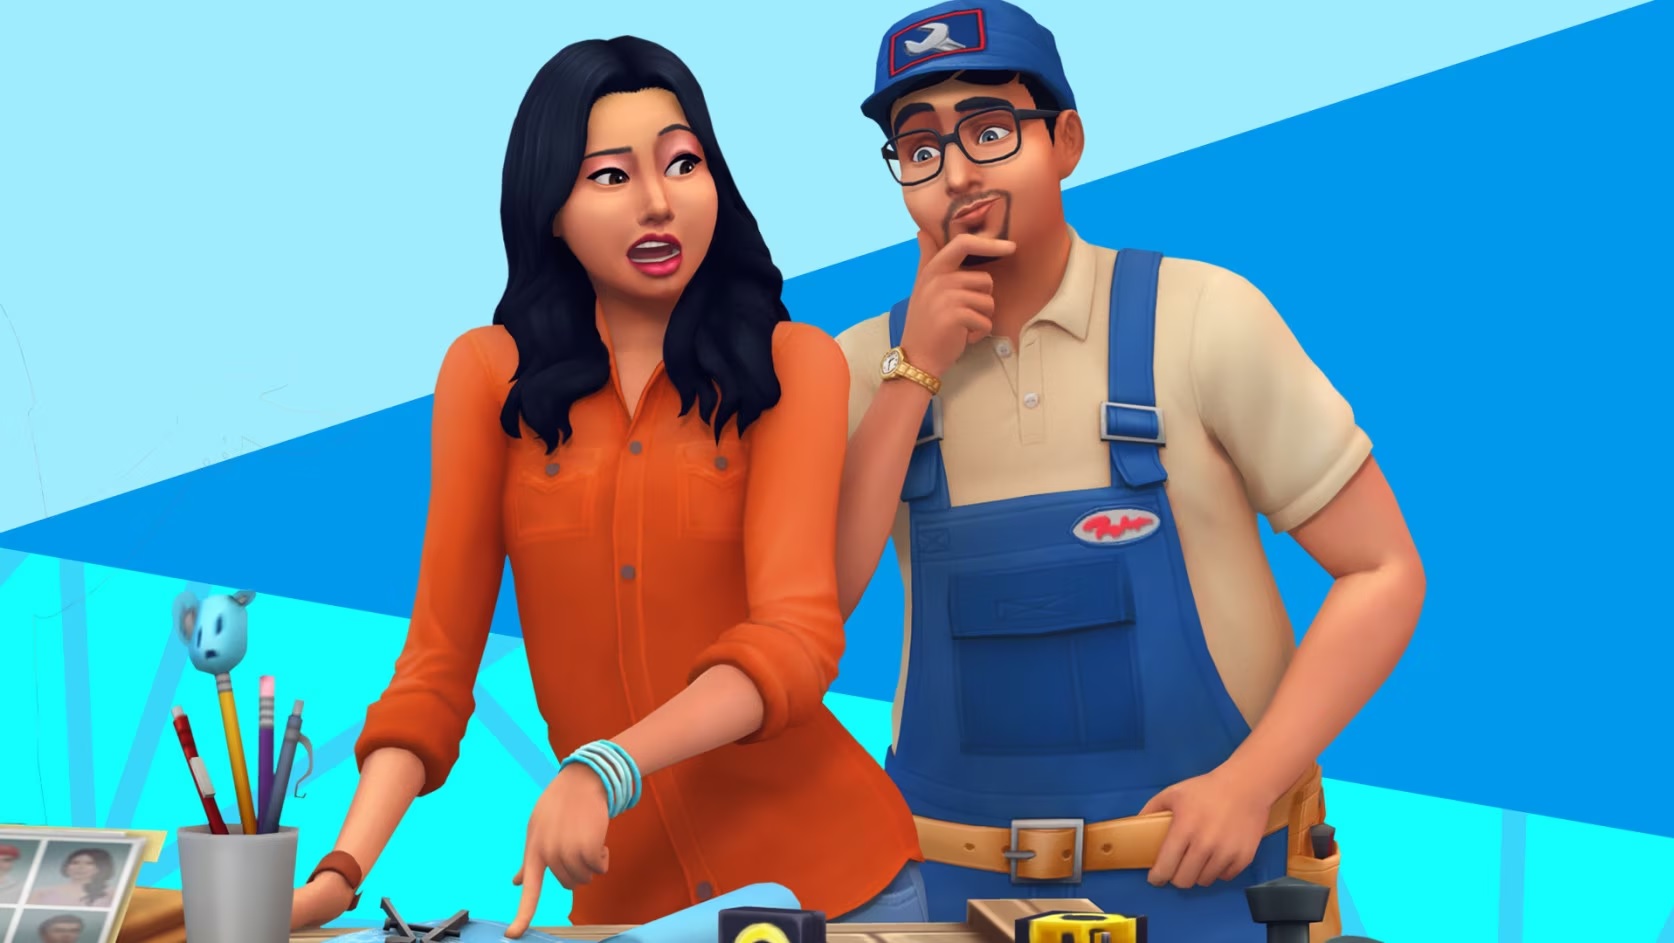  Sims 4 players have found what might be a build mode bug but we're all hoping is a new feature 